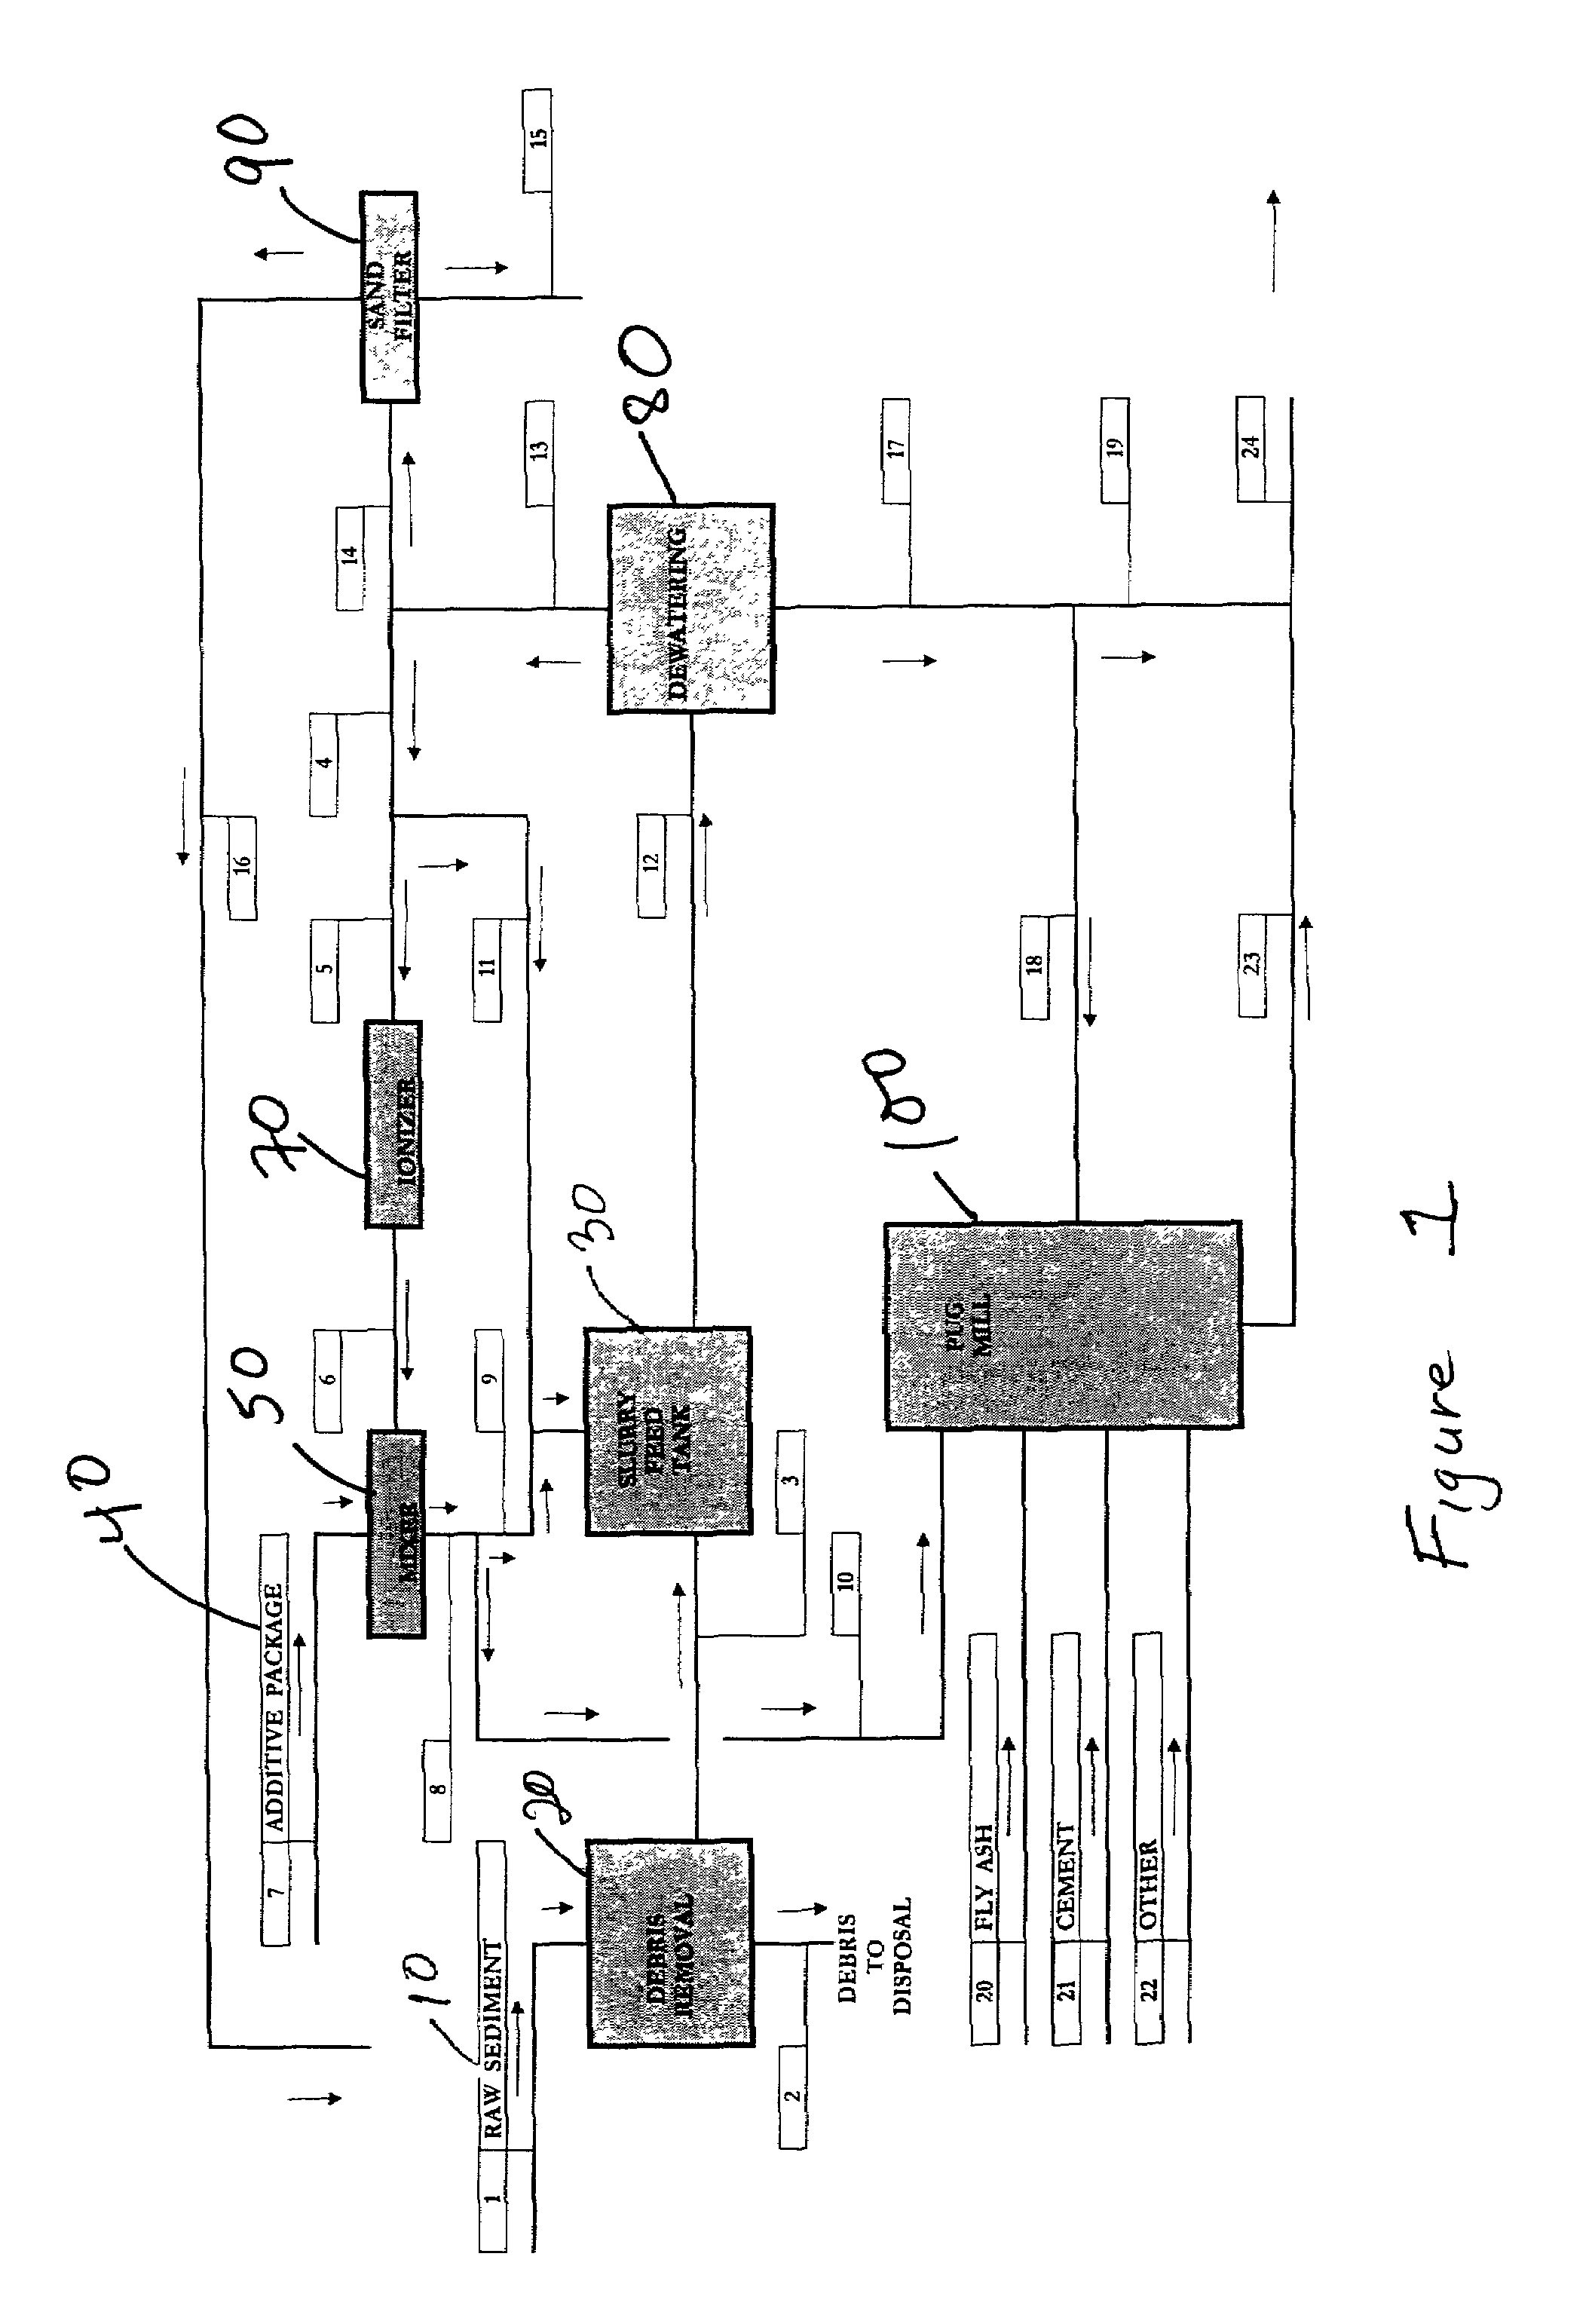 Method for treating dredged material